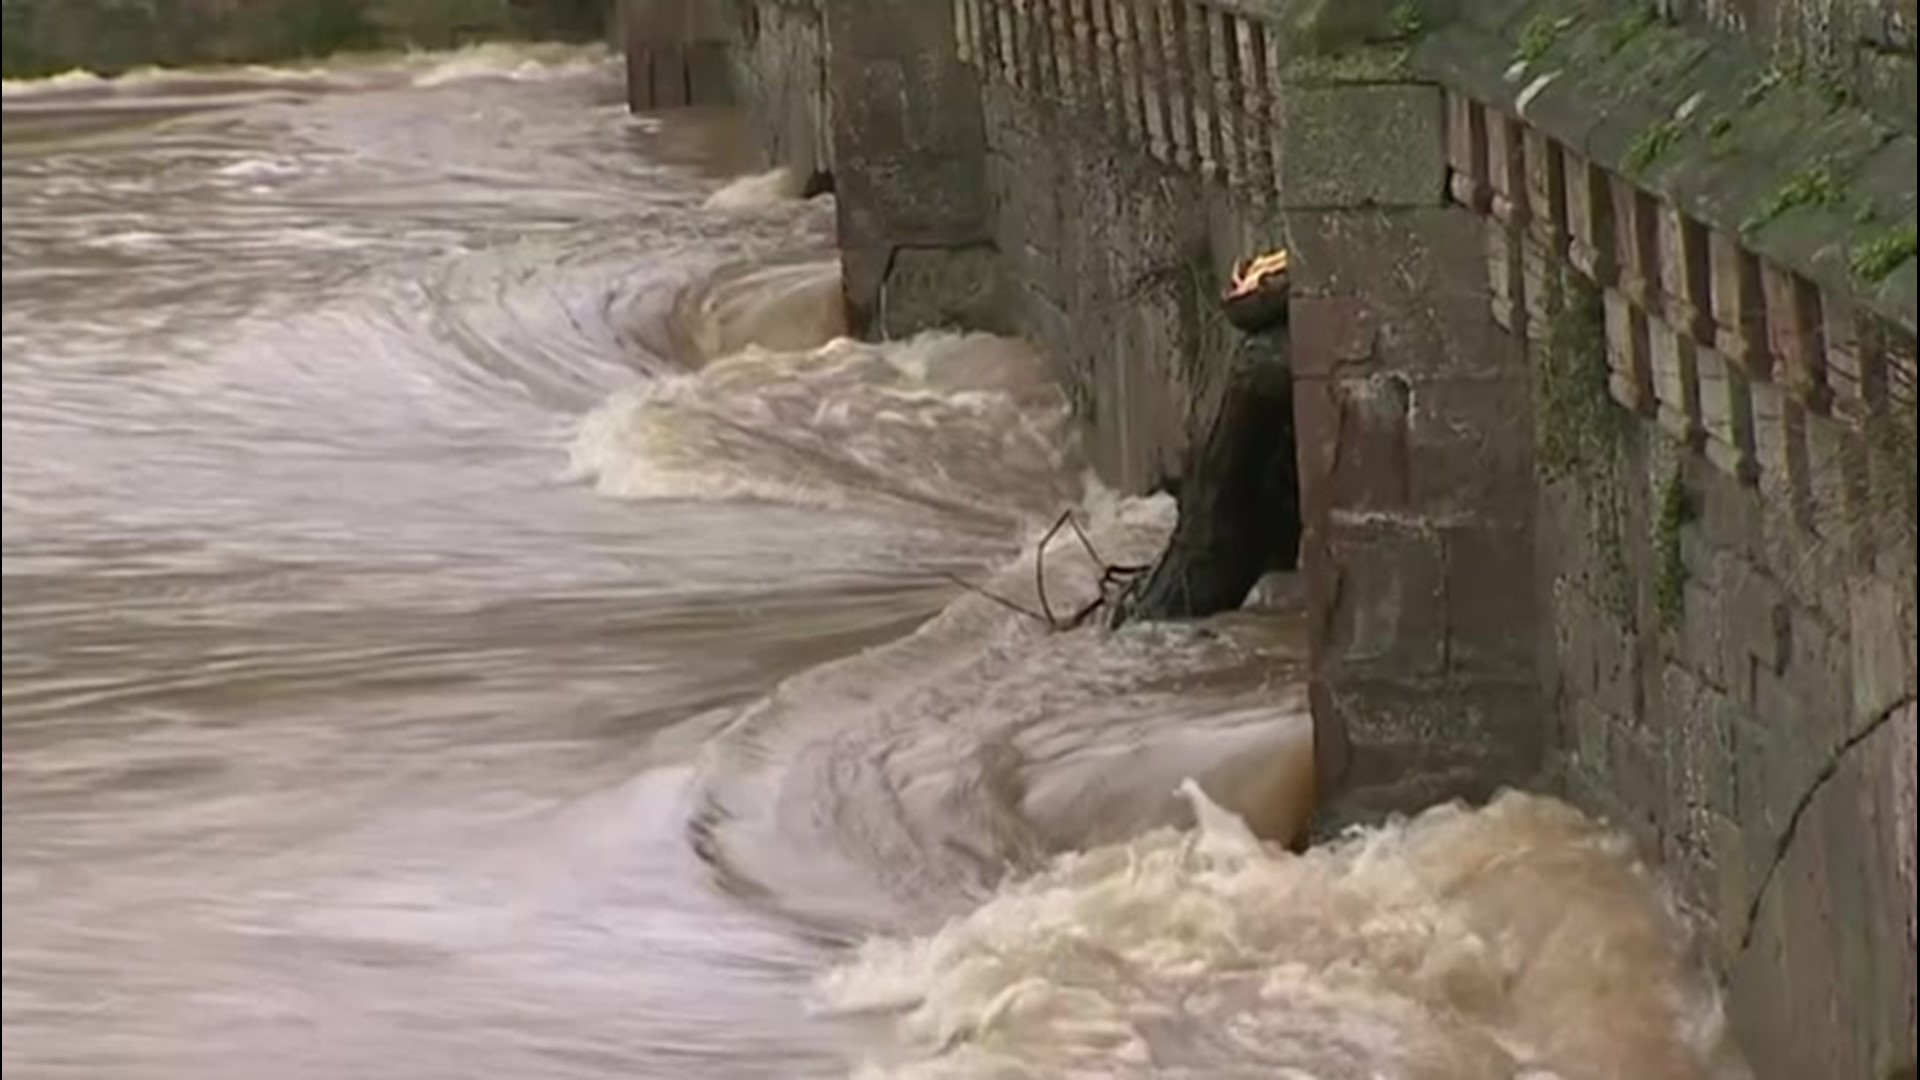 Storm Dennis triggers severe flooding that overwhelmed the Wye River in Monmouth, Wales, which reached a record-breaking 23 feet on Feb. 18.